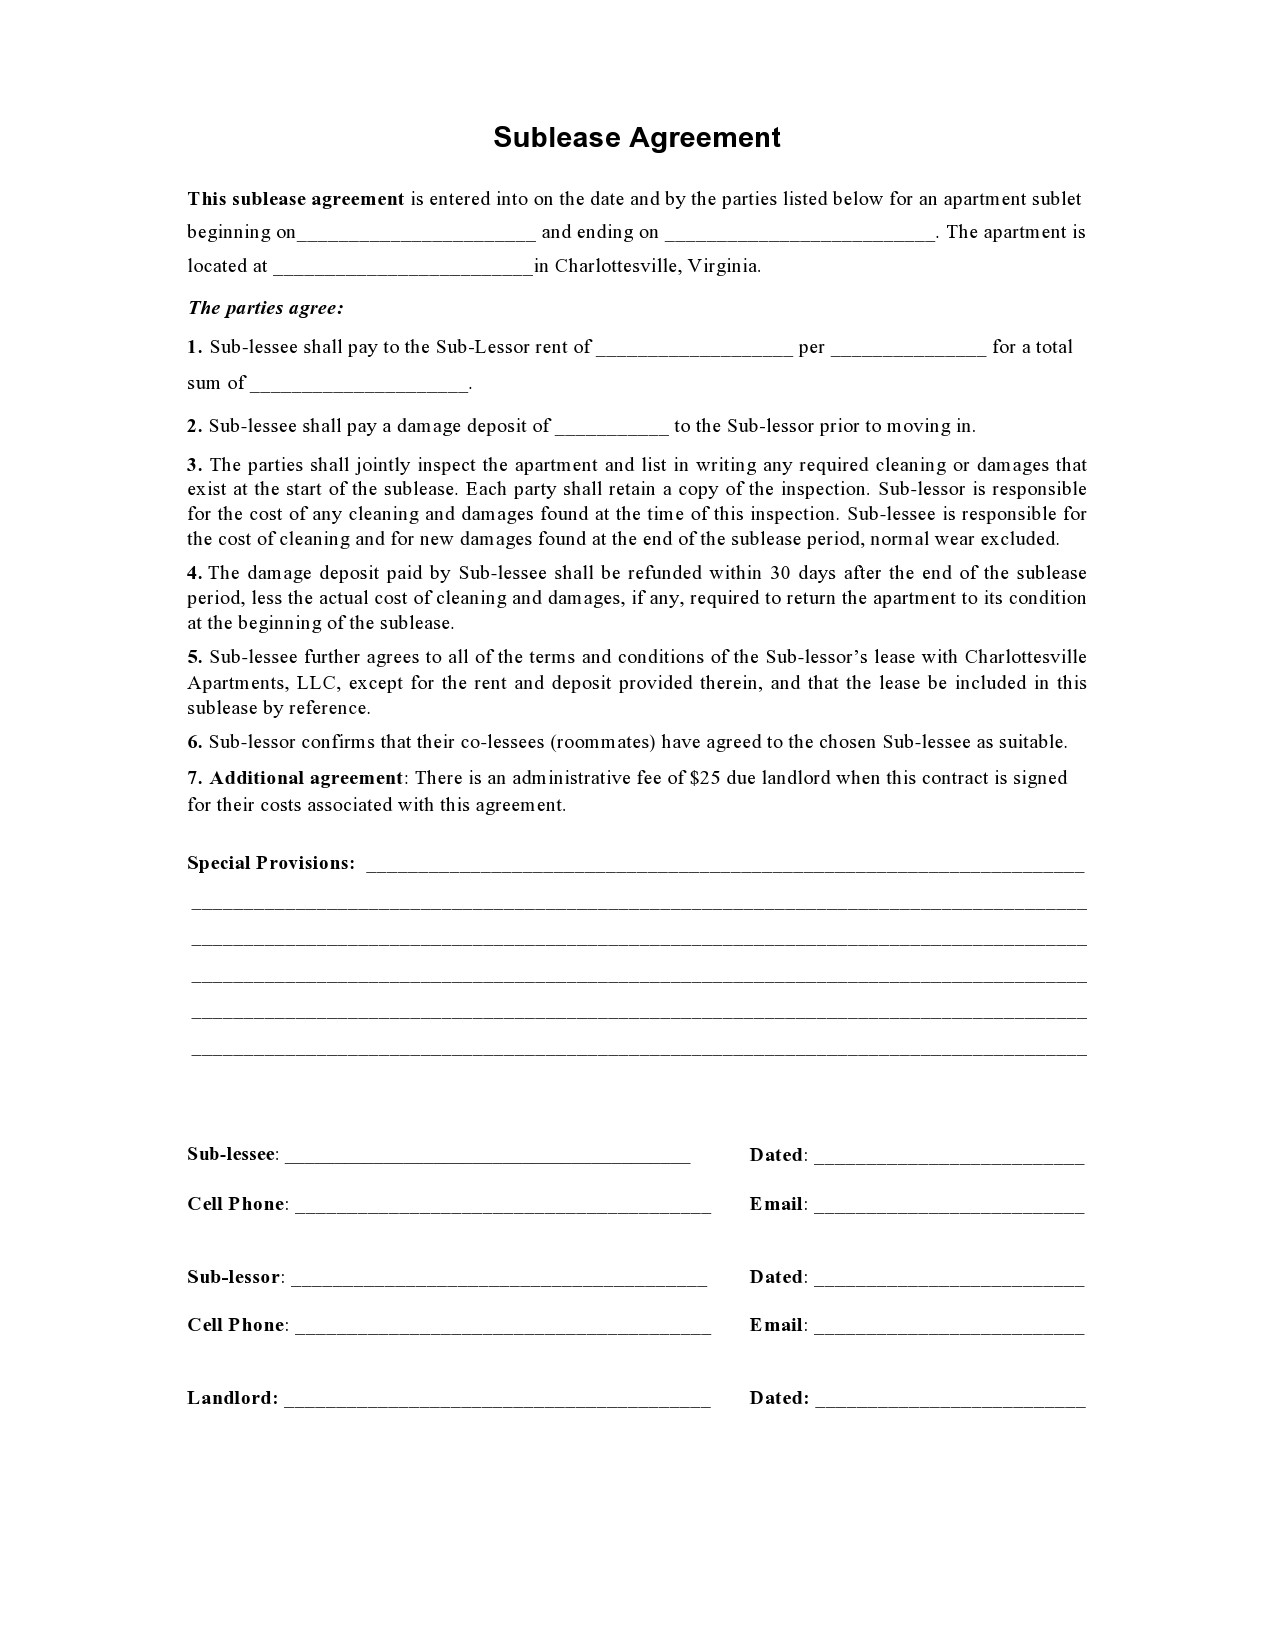 Free residential sublease agreement 03